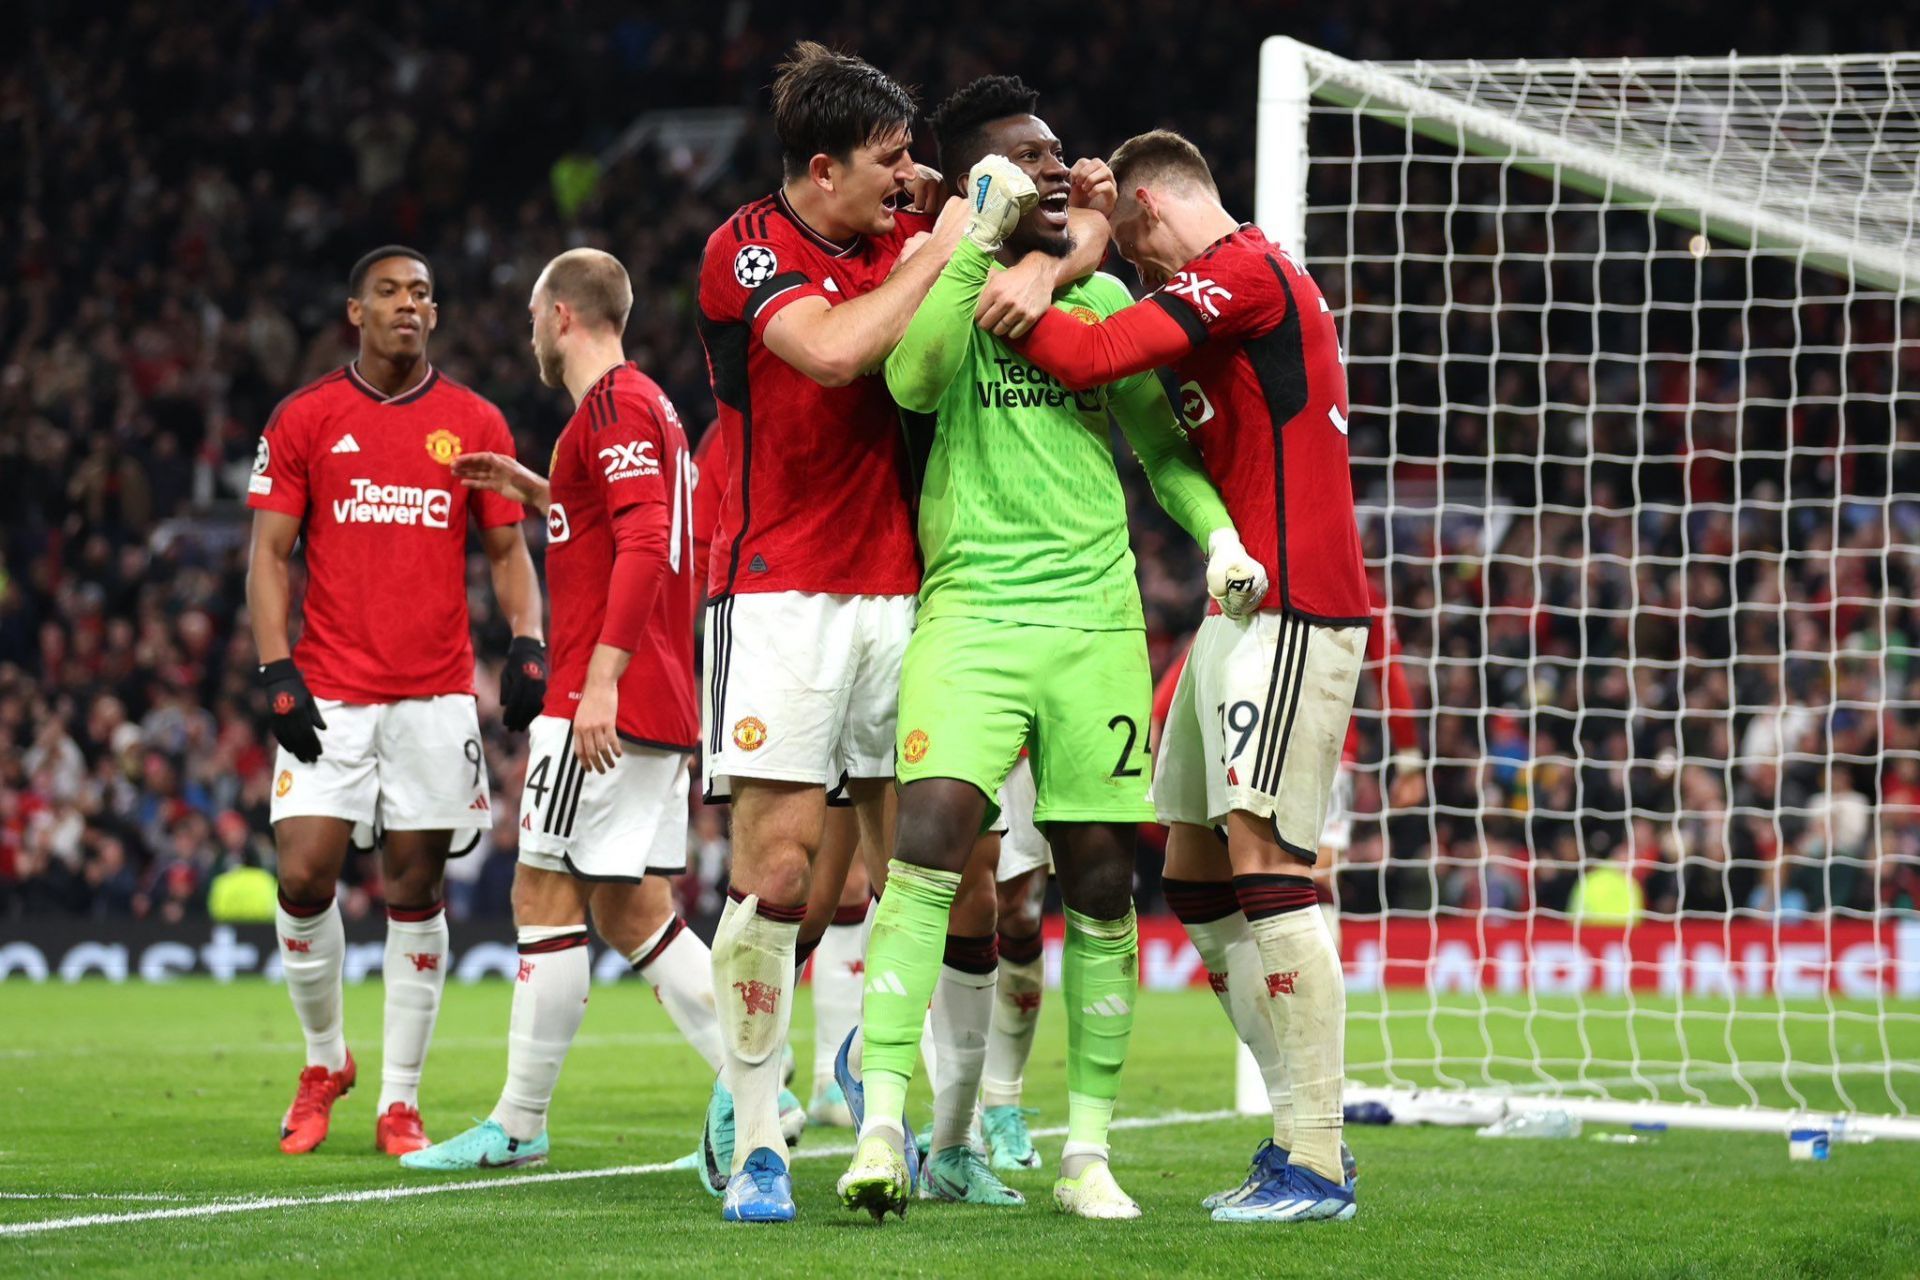 Manchester United United boosted their hopes of reaching the Champions League knockout stage with a win over Copenhagen